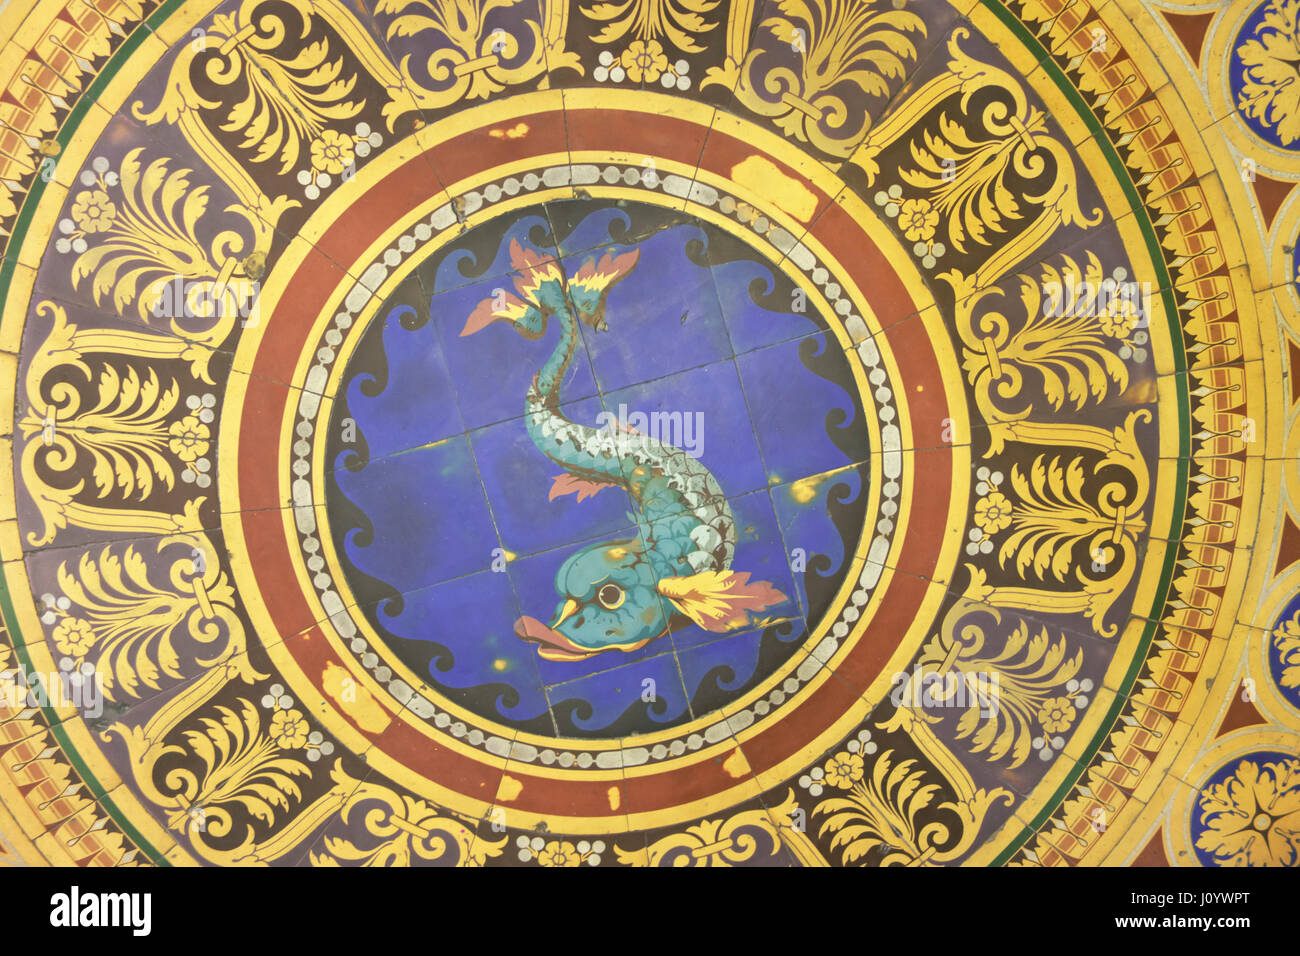 St George's Hall Liverpool. Detail of the Minton Tiled floor of the Great Hall. An encaustic tiled floor of more than 30,000 handcrafted tiles. Stock Photo